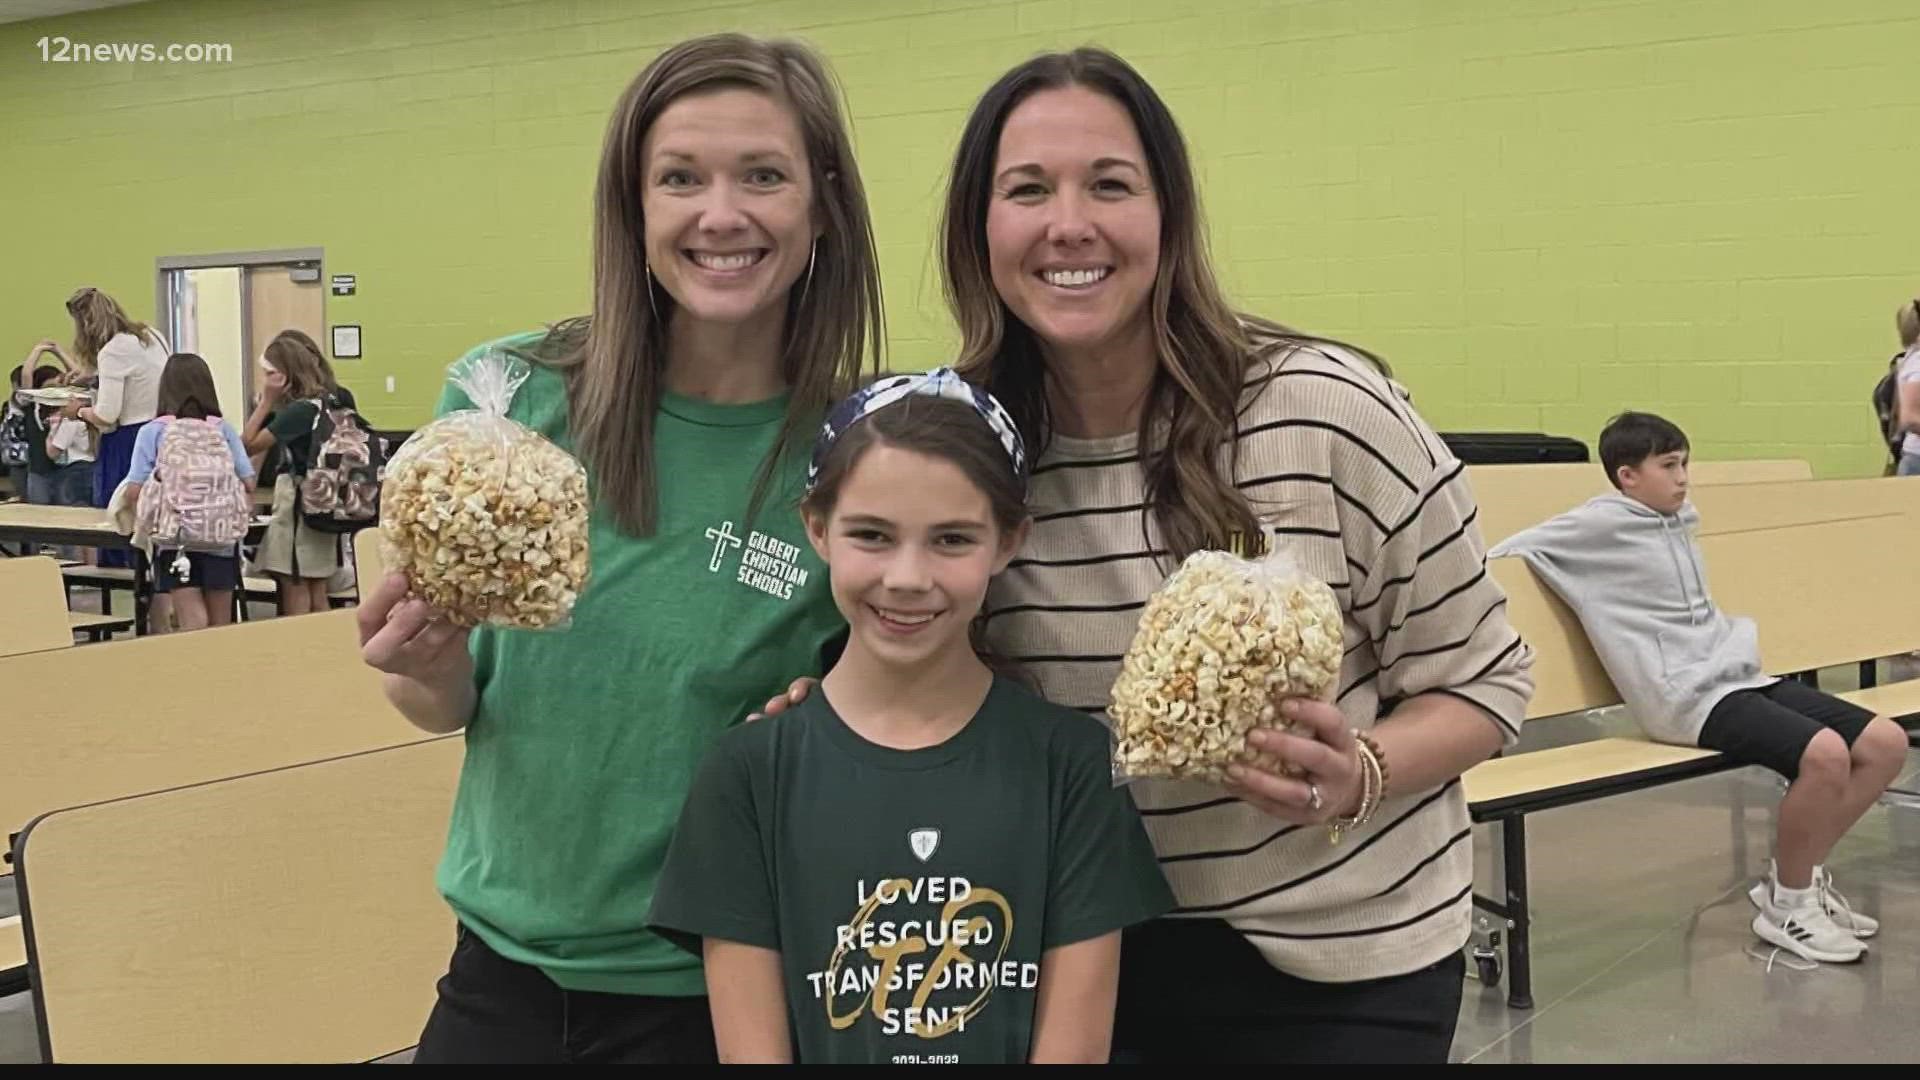 An East Valley mom and math teacher is one of the brains behind a club that’s using startup thinking to change the way kids learn, through a hands-on experience.